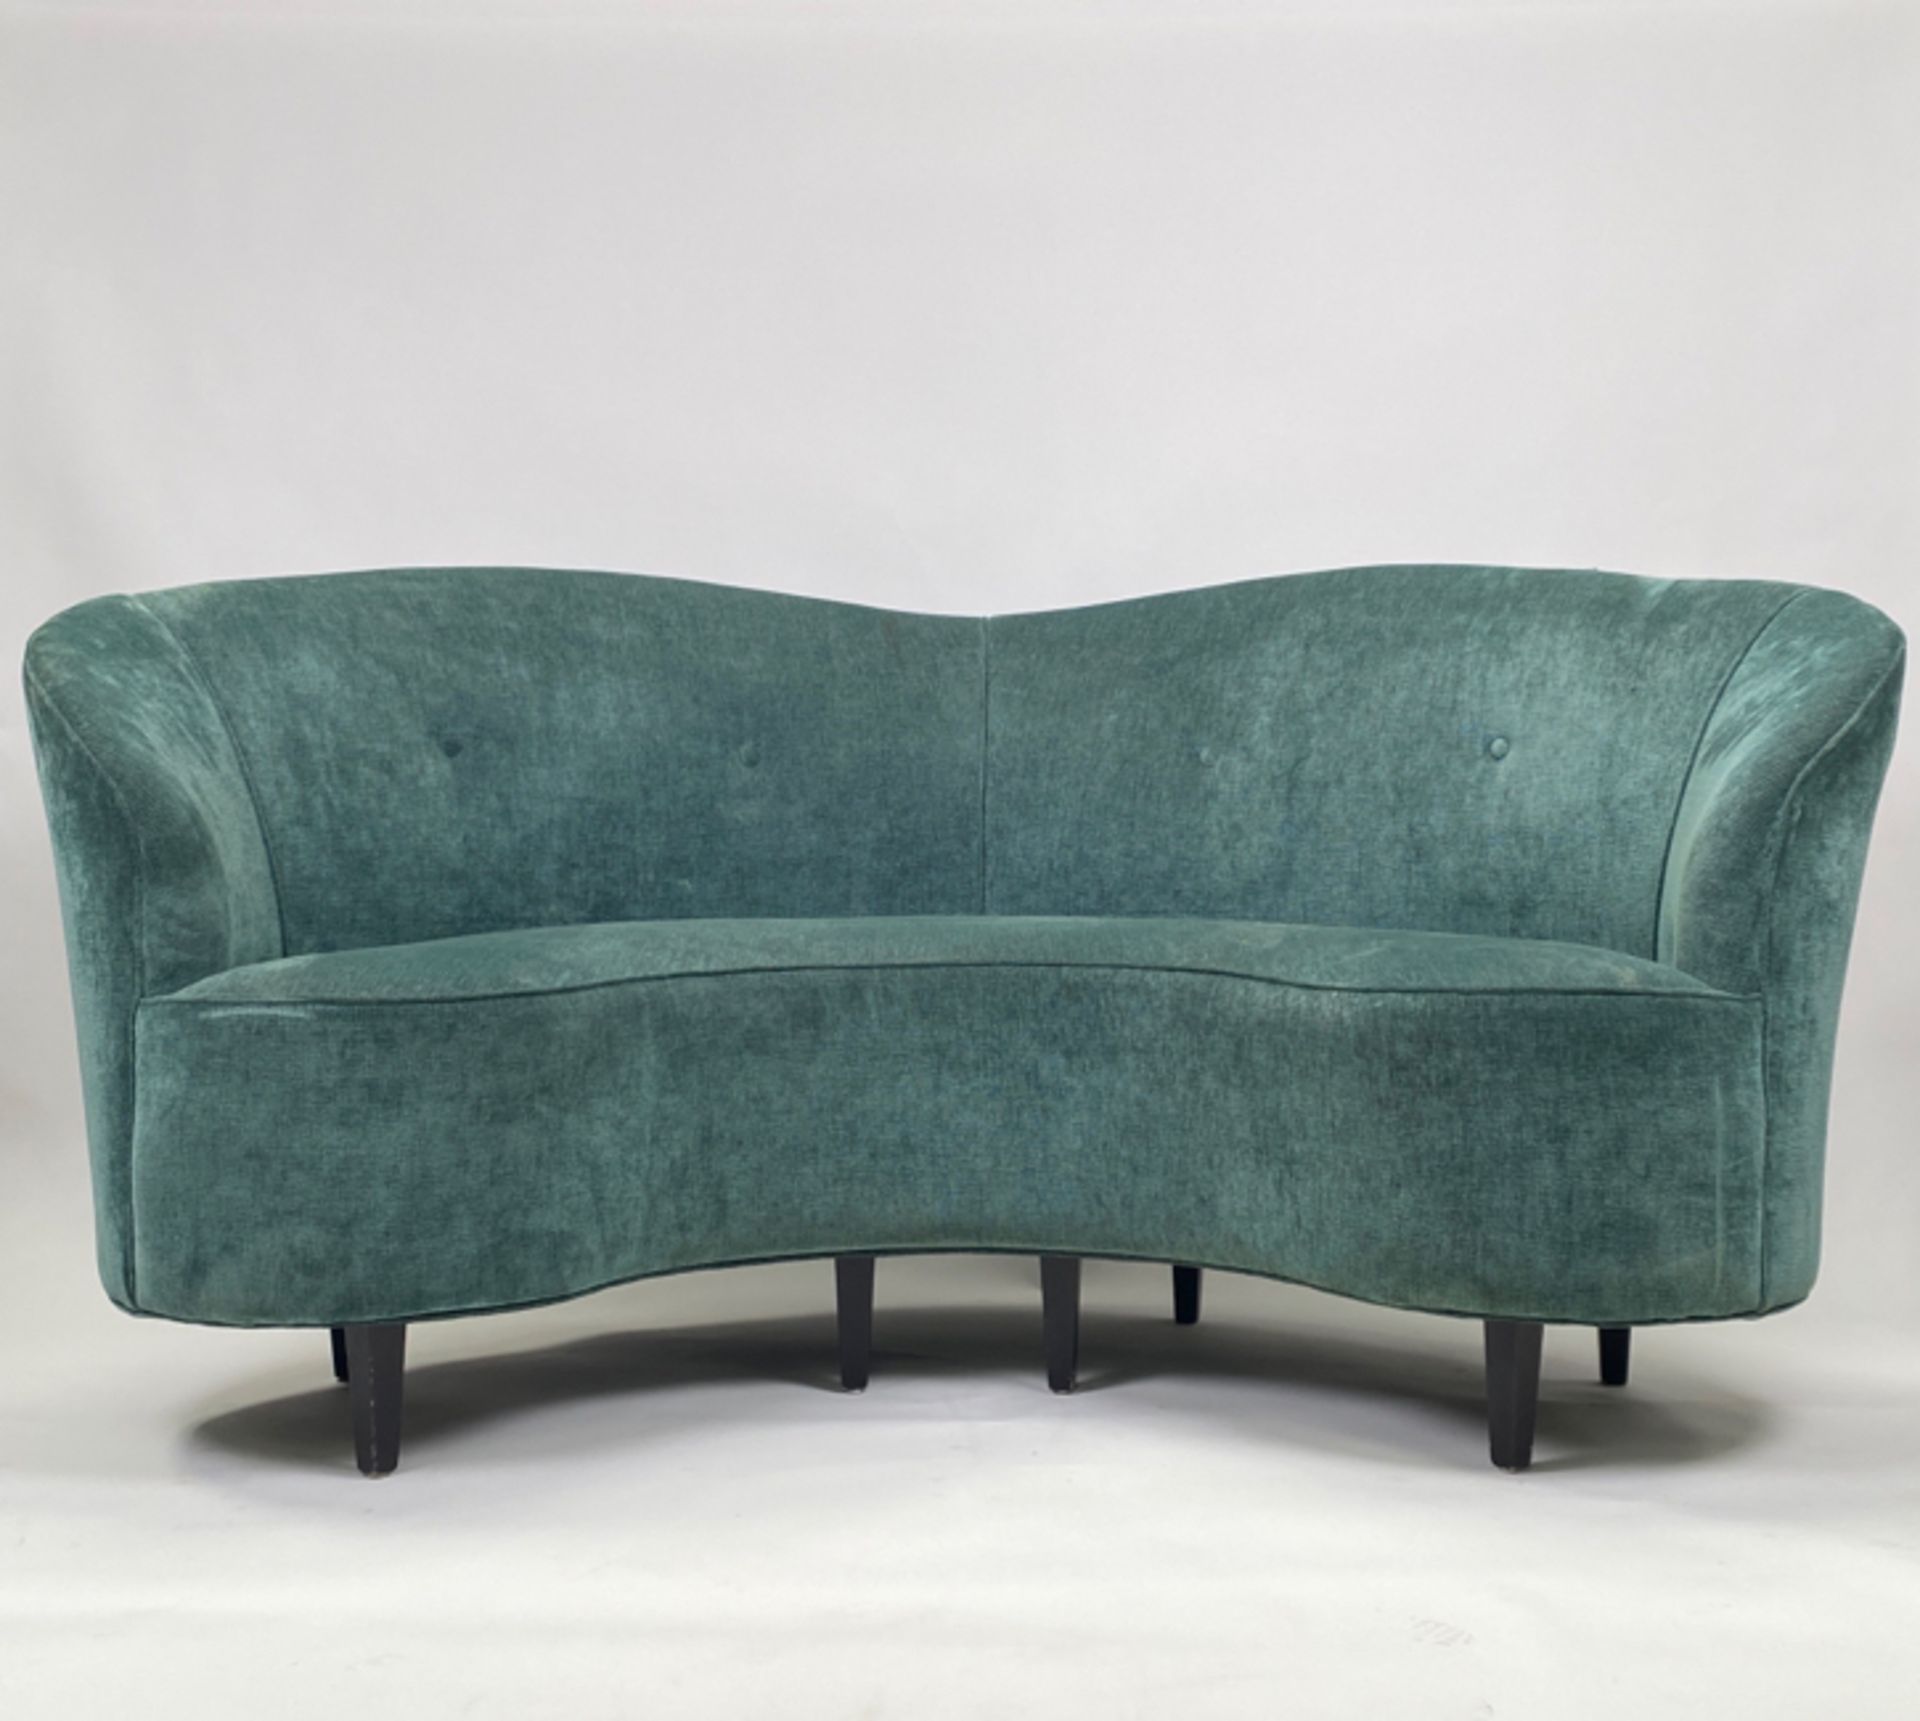 Curved Teal Sofa - Image 2 of 5